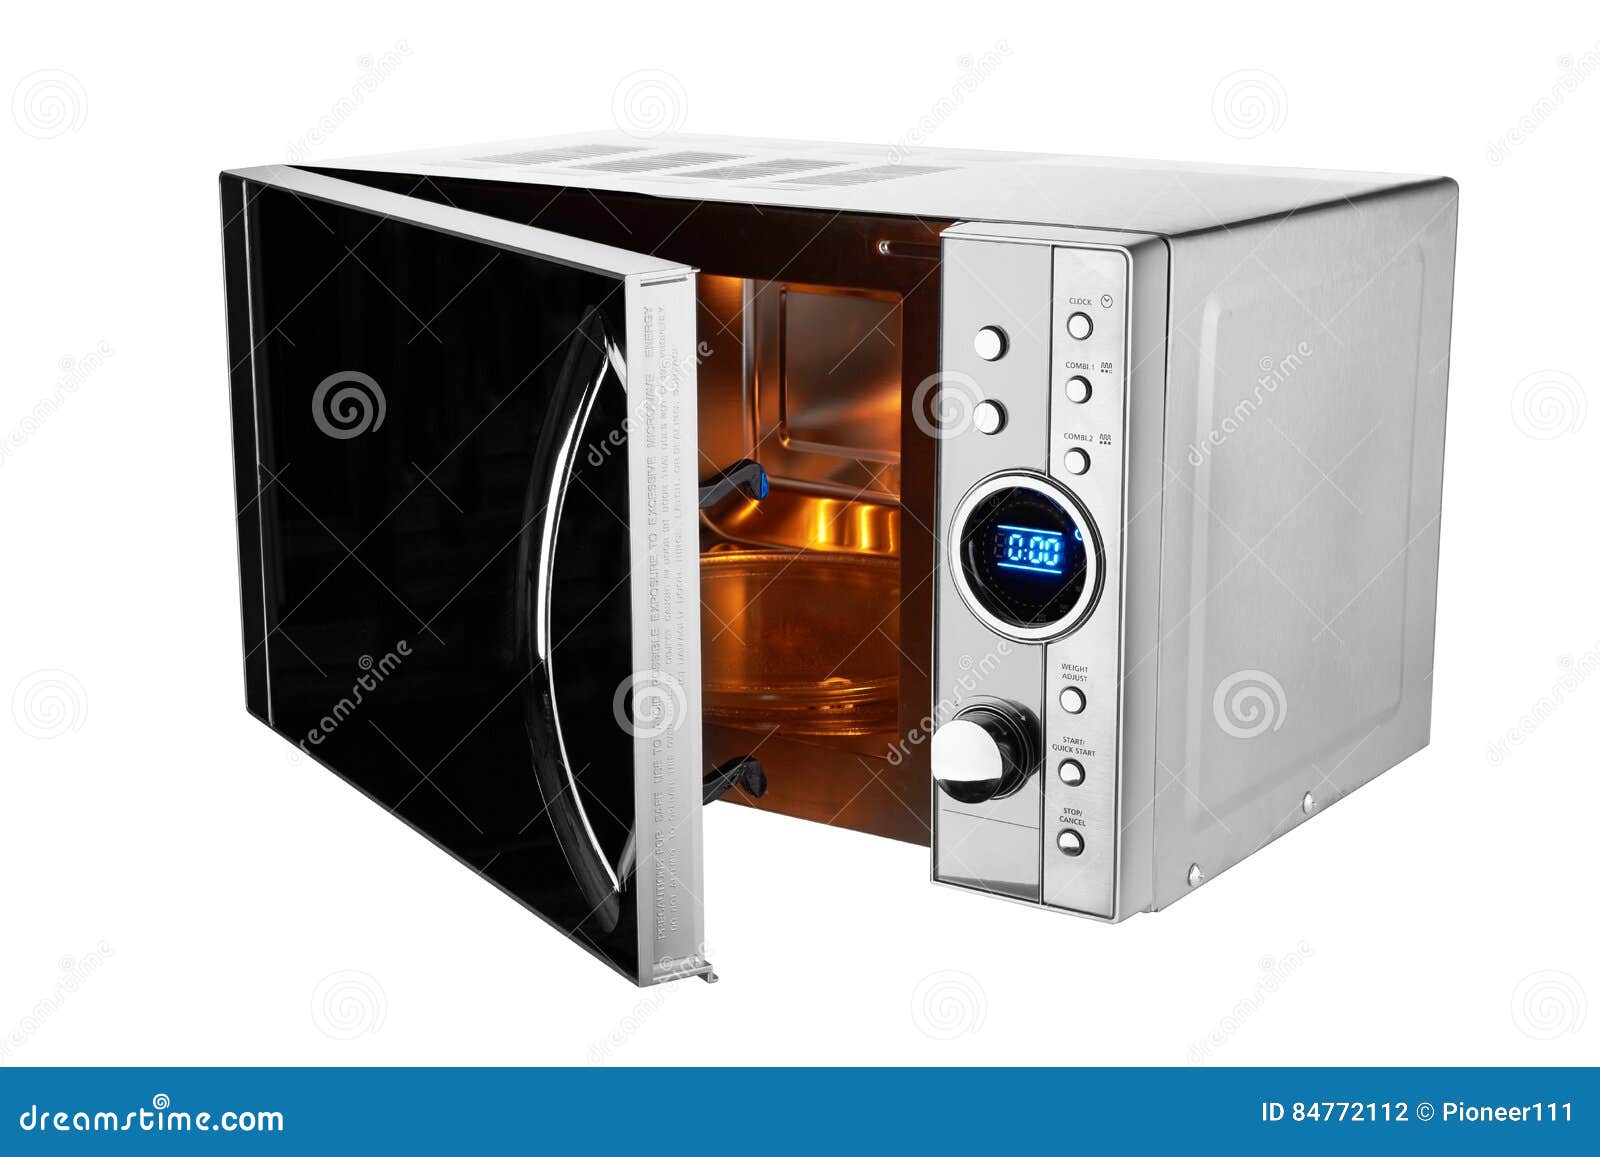 Open microwave oven stock photo. Image of switch, object - 84772112